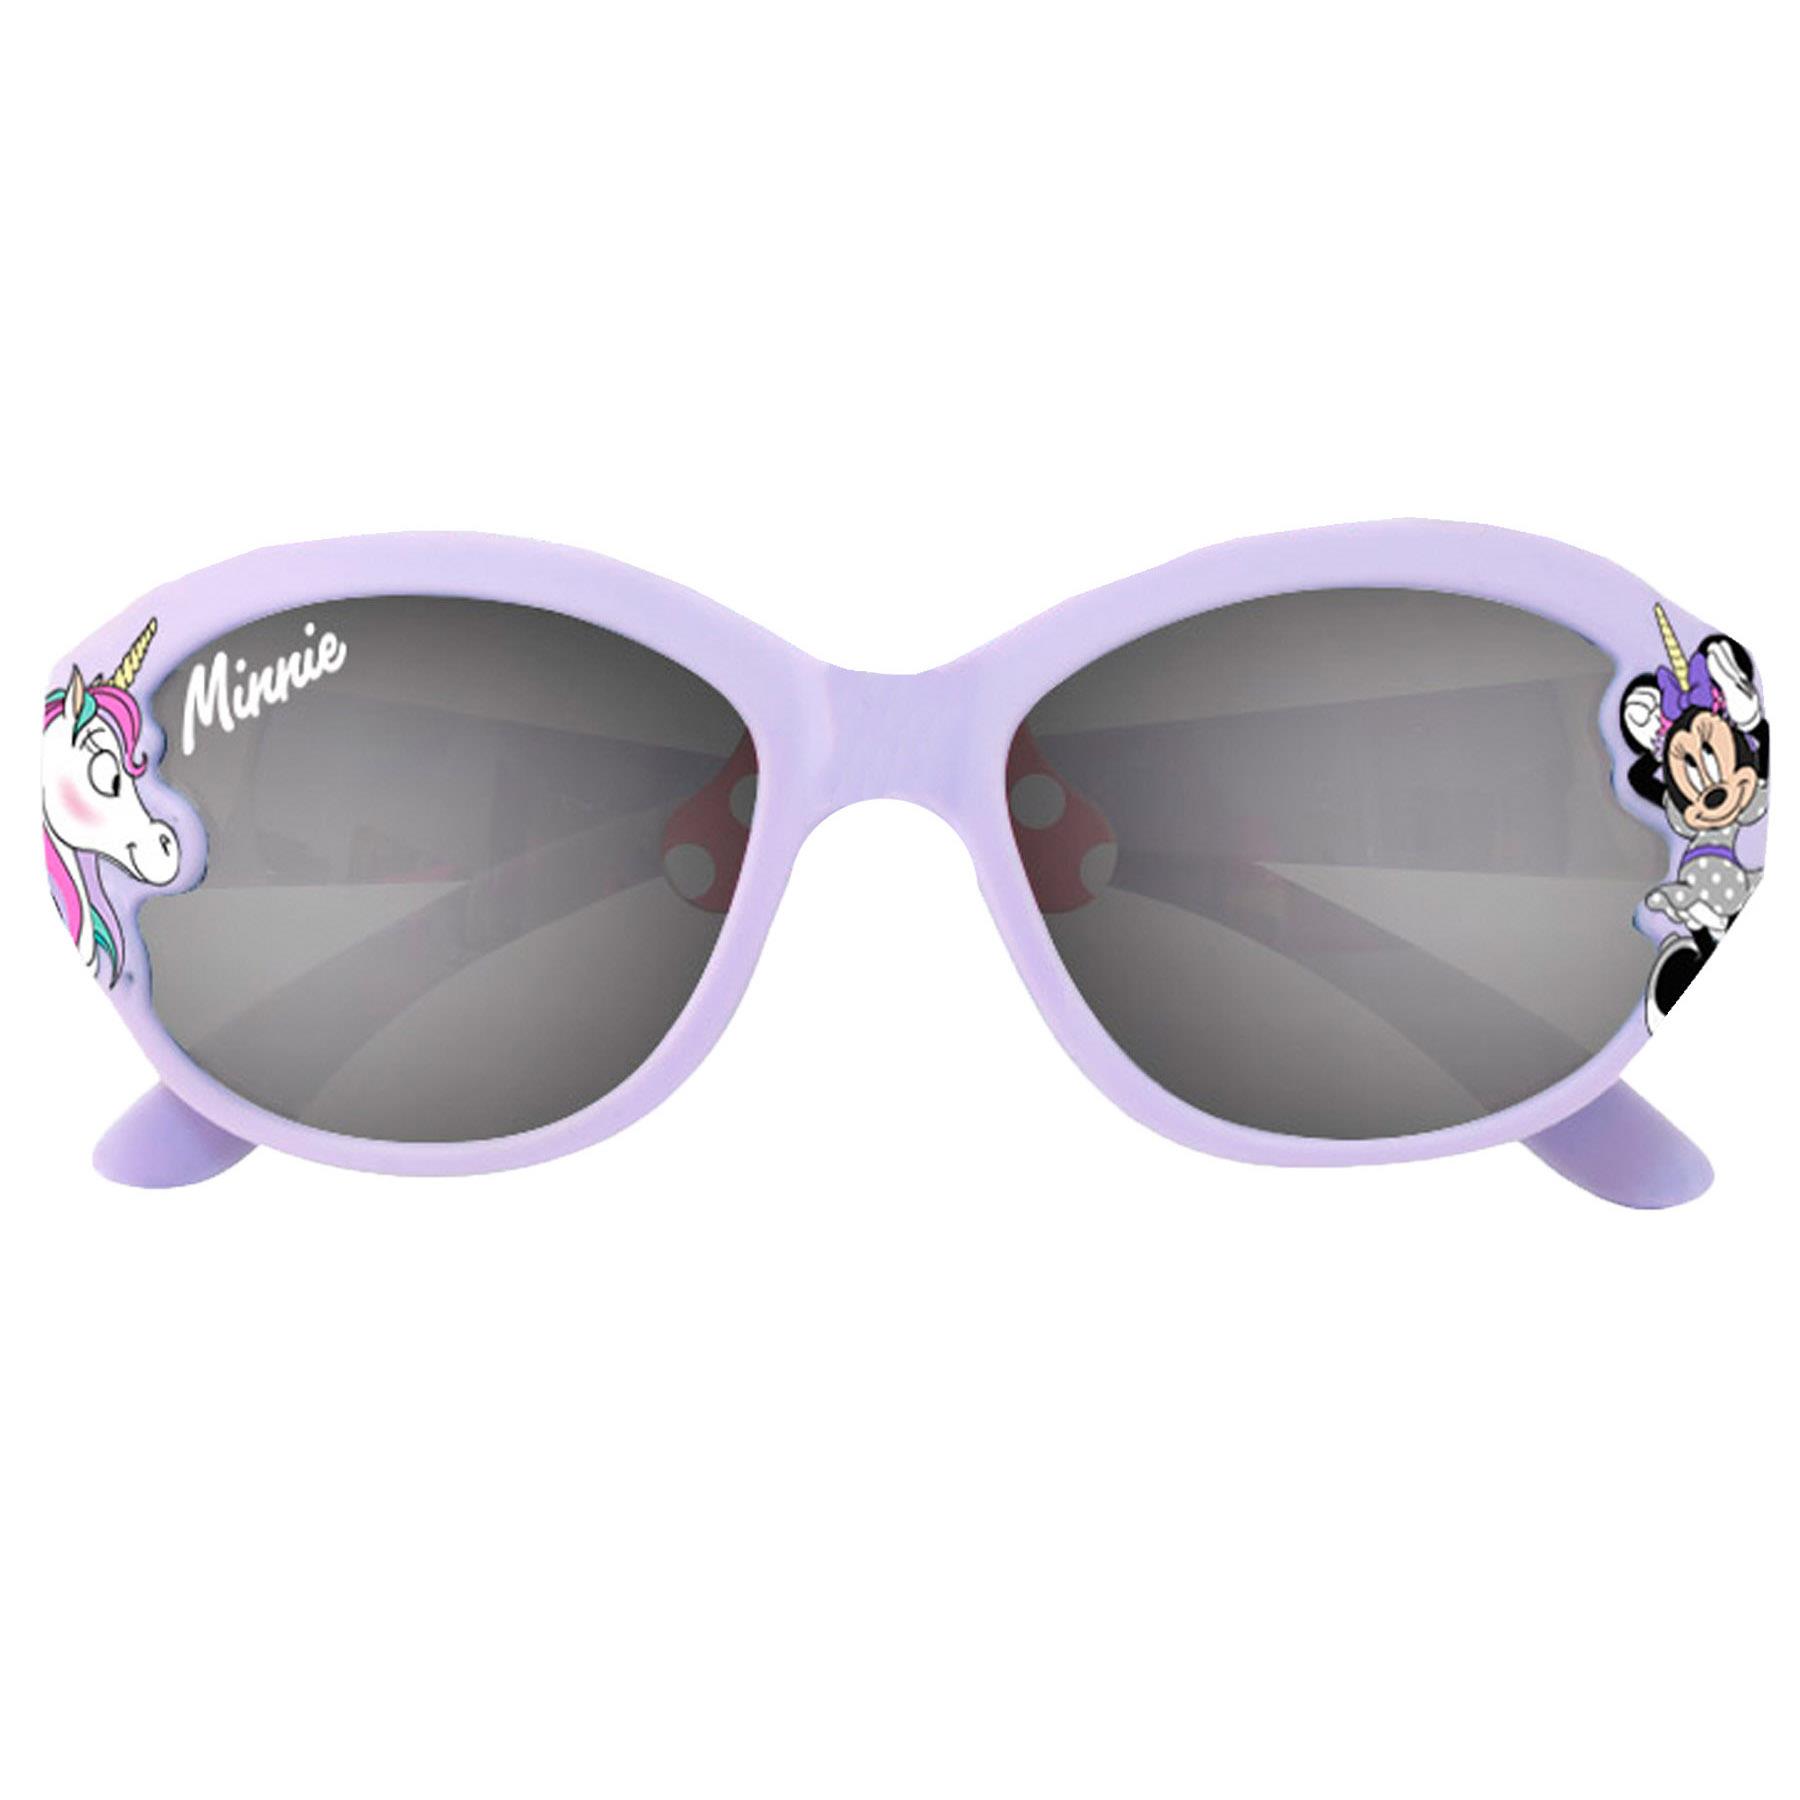 Disney Minnie Mouse Children's Sunglasses UV protection for Holiday - MIN31